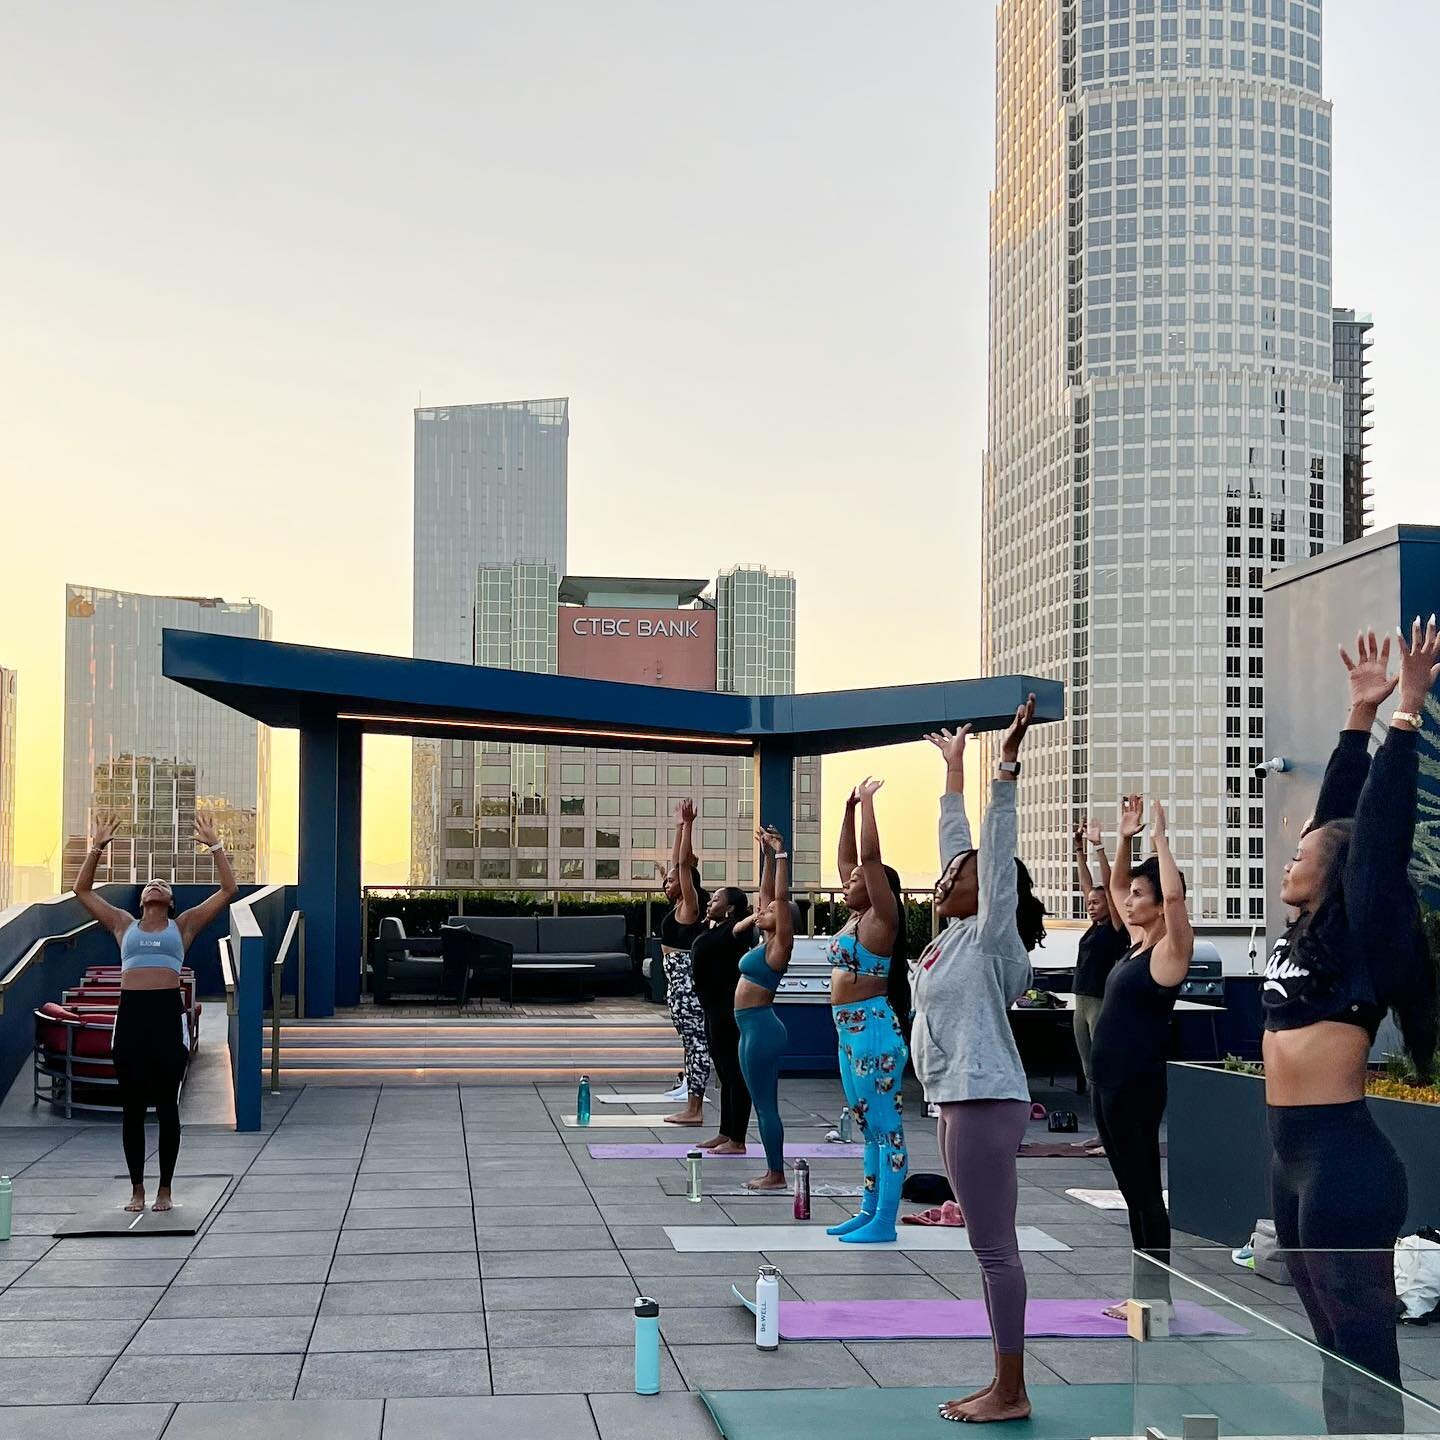 Happy Monday! Wishing everyone a productive and prosperous week!

Last week we had the opportunity to host a rooftop yoga &amp; wine event for the members of @lagathers 🥳

The vibes and sunset were great. It was a pleasure meeting some of their amaz